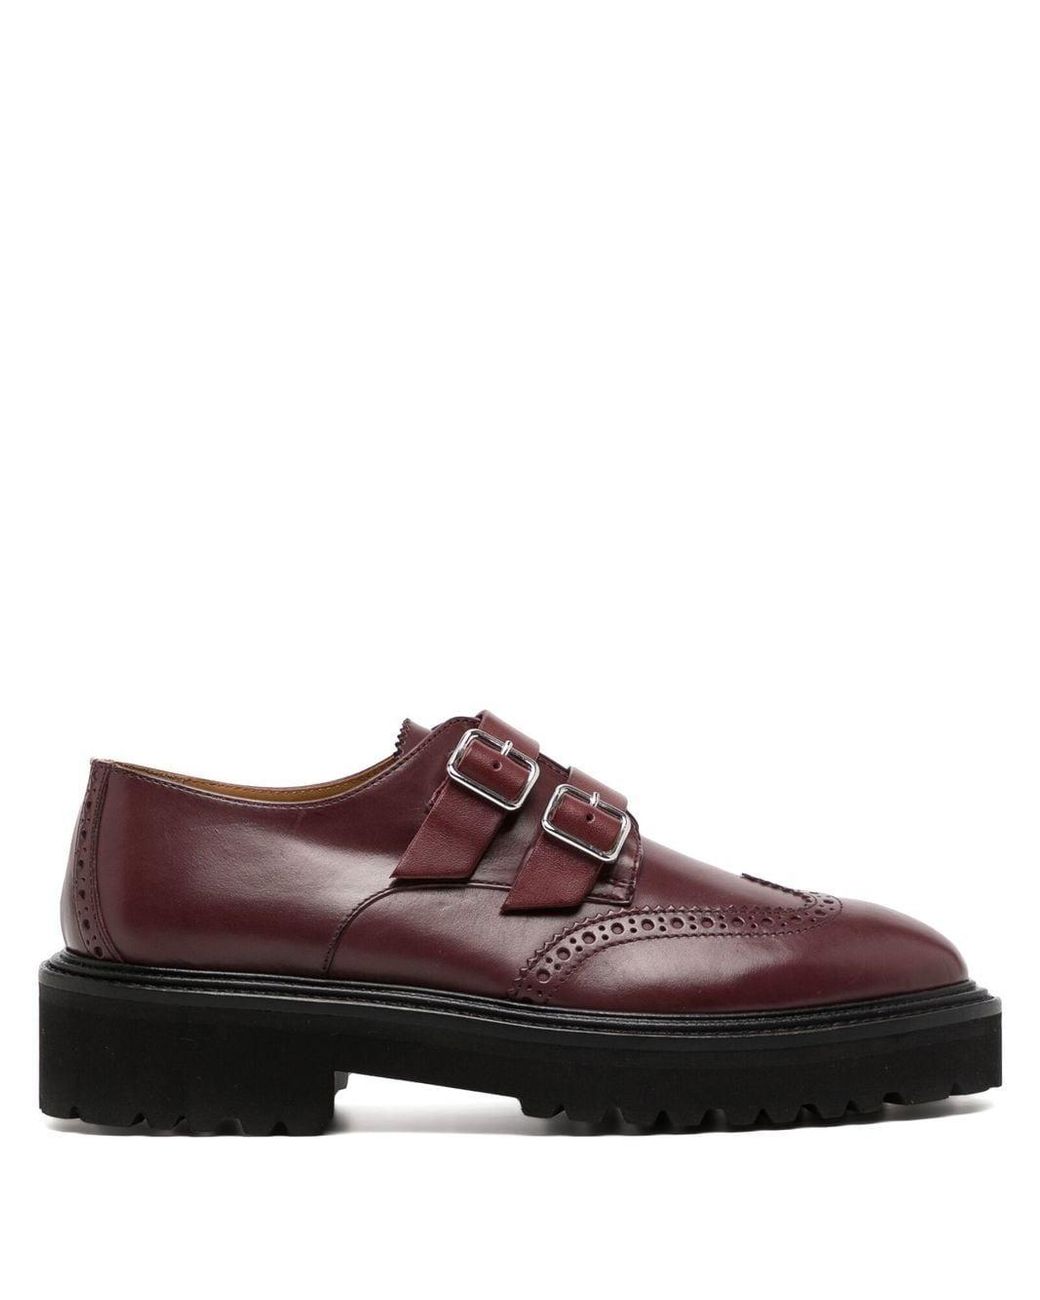 Paul Smith Raelyn 40mm Monk-strap Brogues in Brown | Lyst